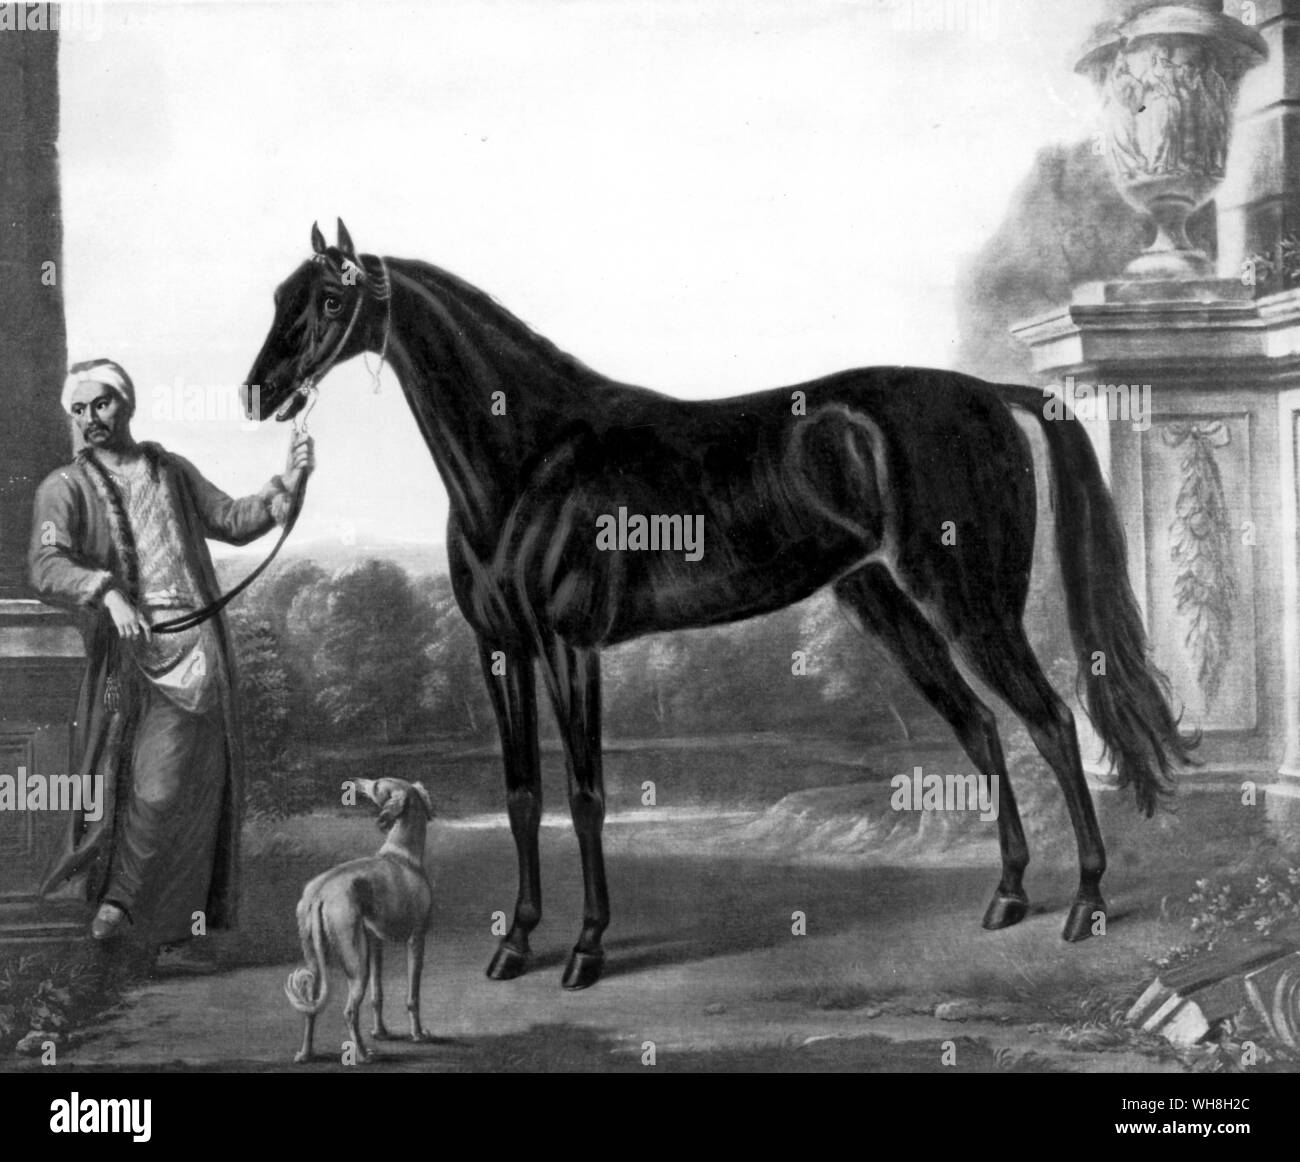 Byerley Turk, the eldest of the three famous founders of the Thoroughbred, the Byerley Turk's male line descends to the present through Herod. Dark brown colt, c. 1679 by Wootten. Imported into England in 1680s. As his portrait by Wootton shows, the Byerley Turk was an unmarked, dark brown horse with an Arabian appearance, despite his title as a Turk. He was very prepotent, and many of his offspring are noted to have been brown or black like himself. The History of Horse Racing by Roger Longrigg, page 59. . . . Stock Photo